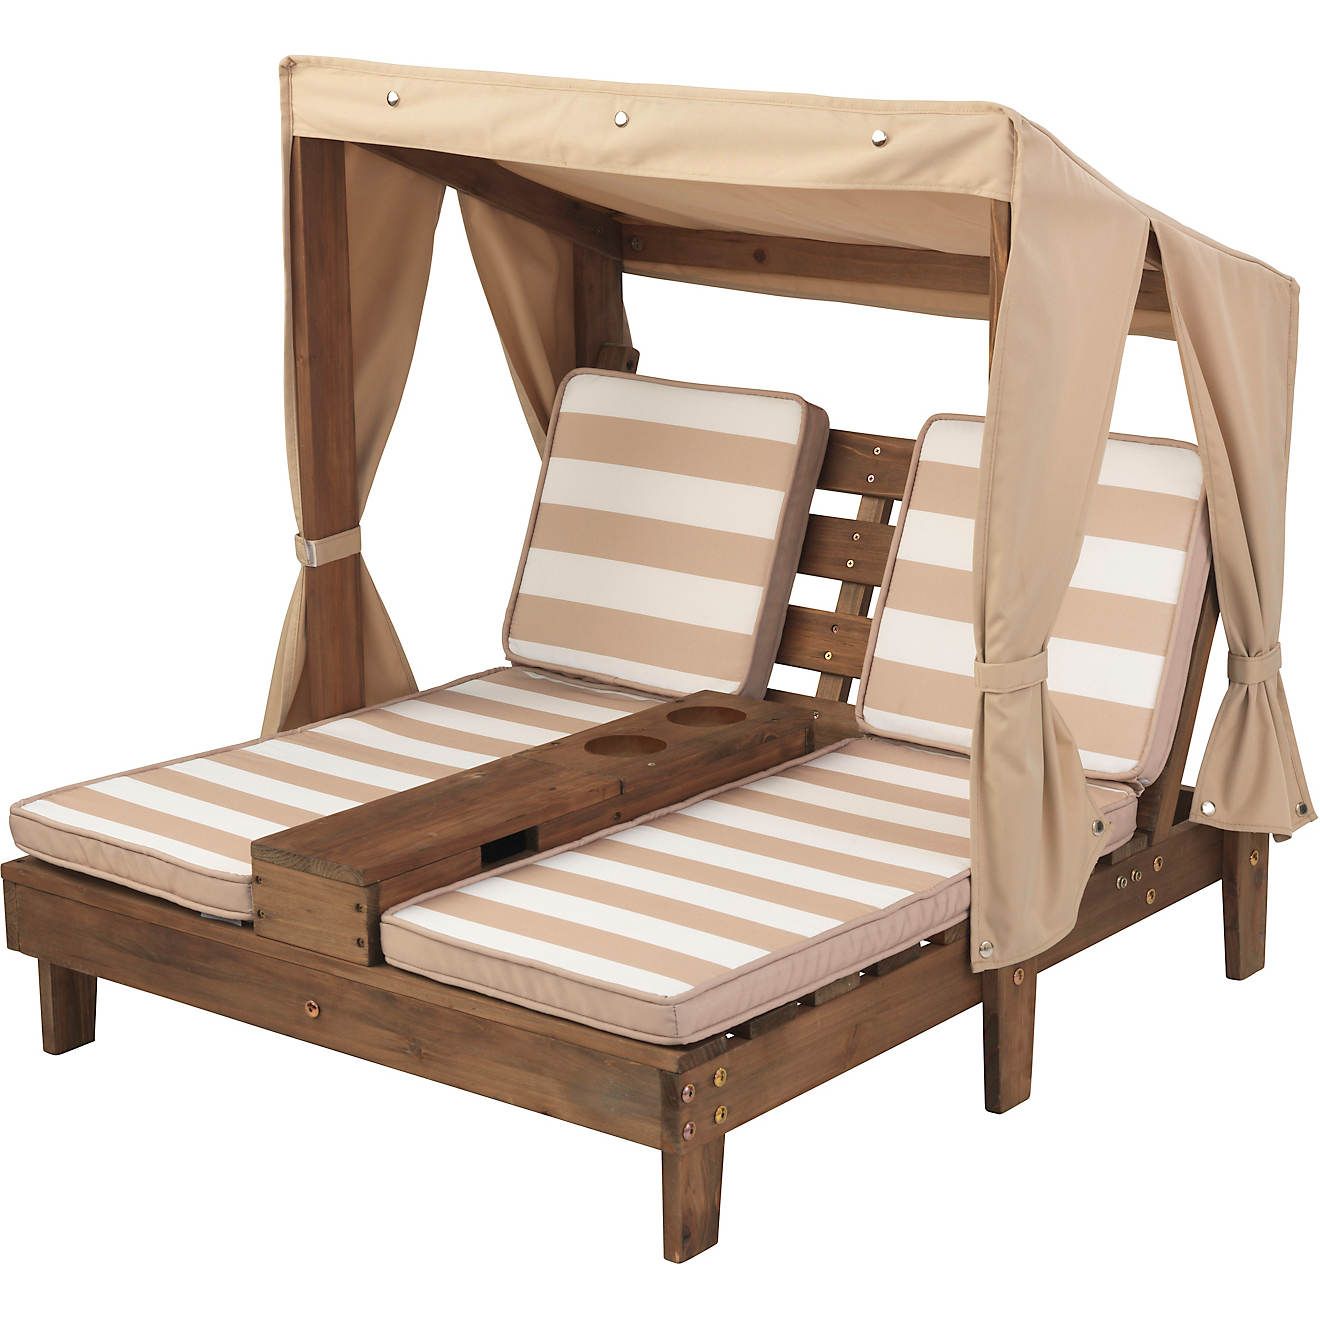 KidKraft Double Chaise Lounge with Cup Holders | Academy Sports + Outdoors